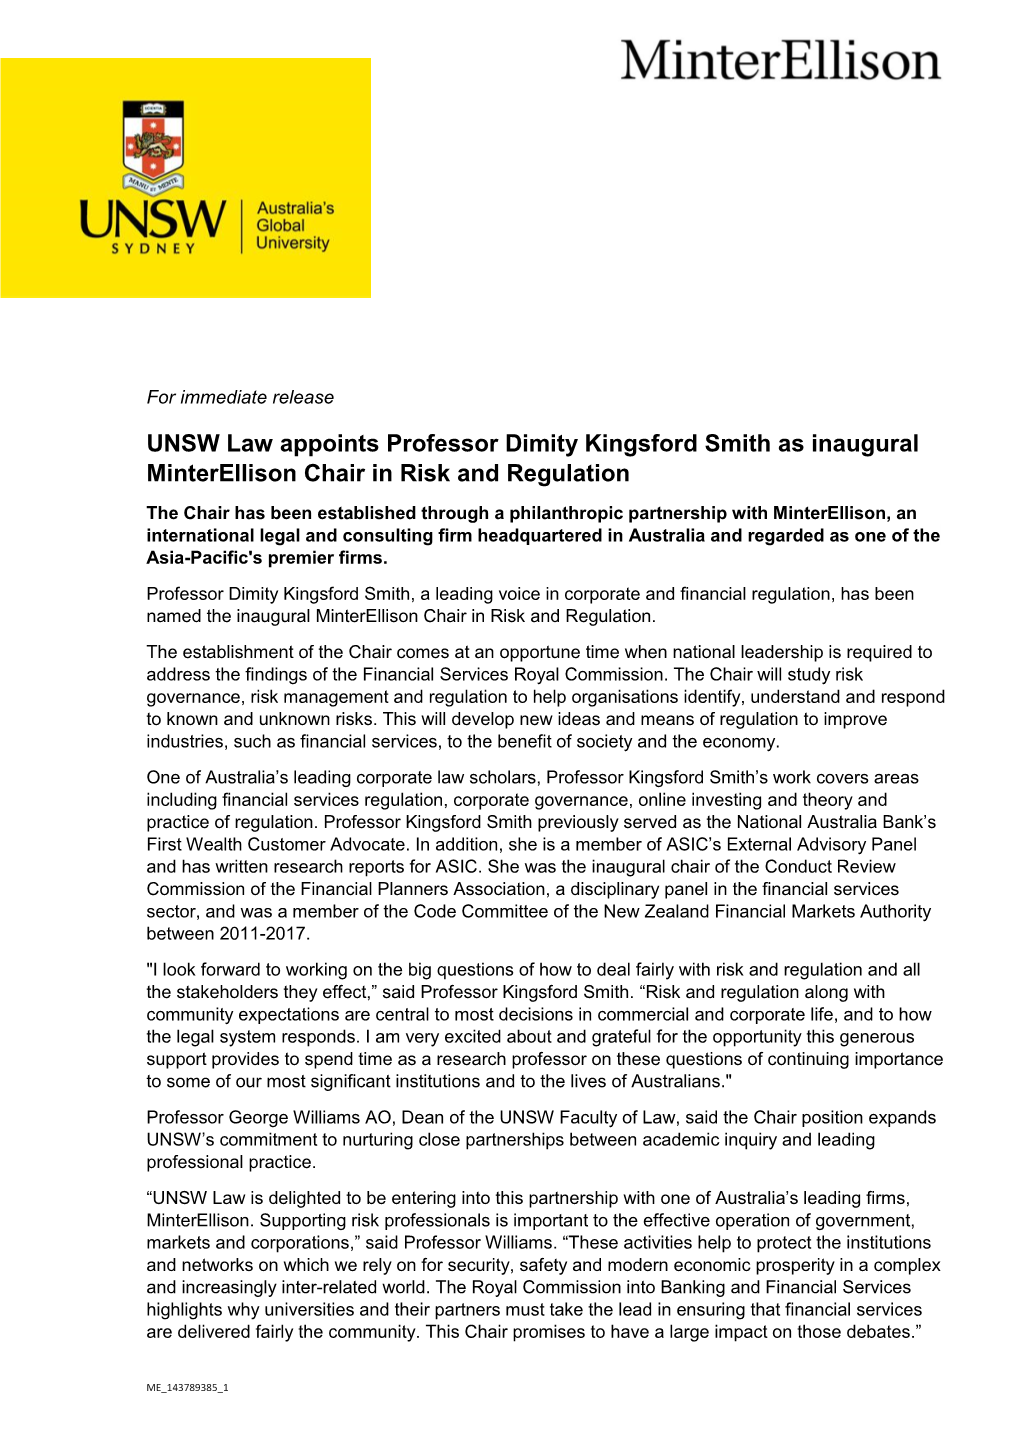 UNSW Law Appoints Professor Dimity Kingsford Smith As Inaugural Minterellison Chair in Risk and Regulation